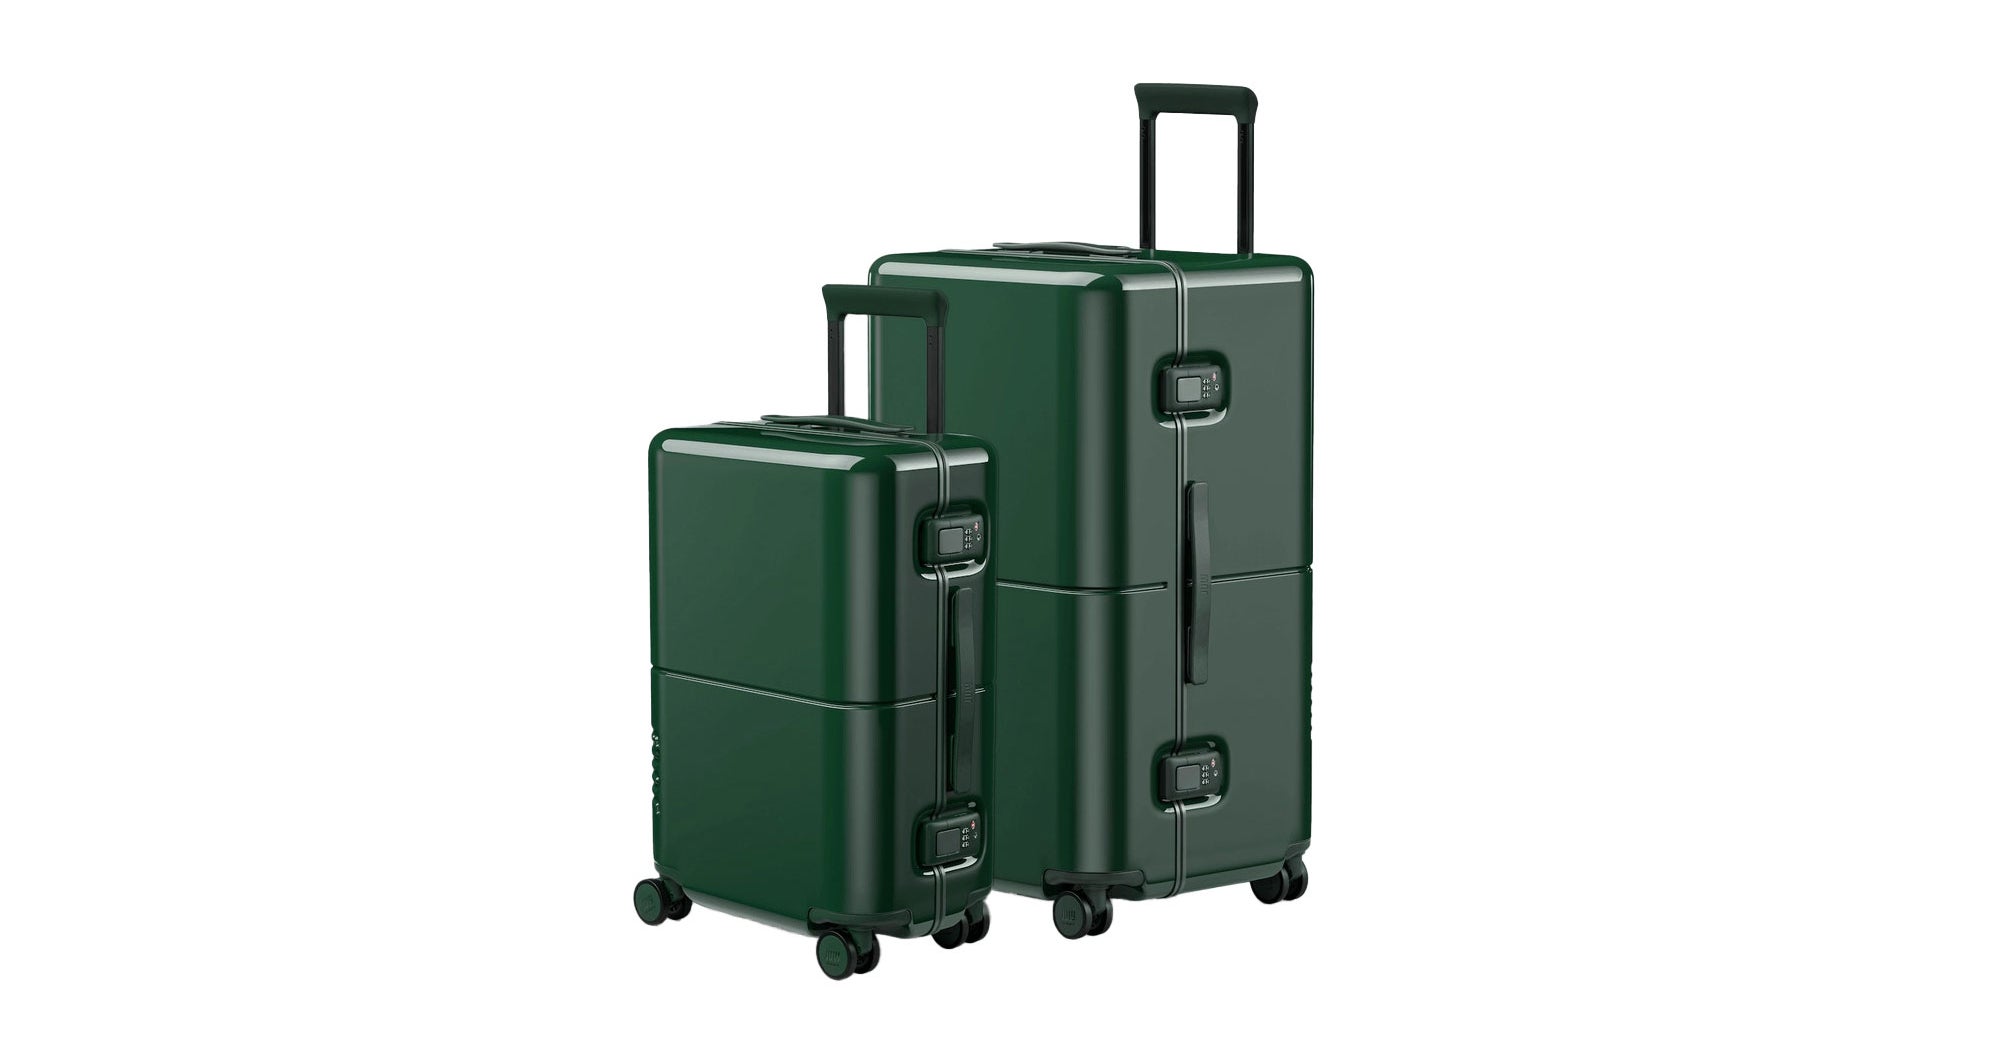 Travel in style with this three-piece designer luggage set